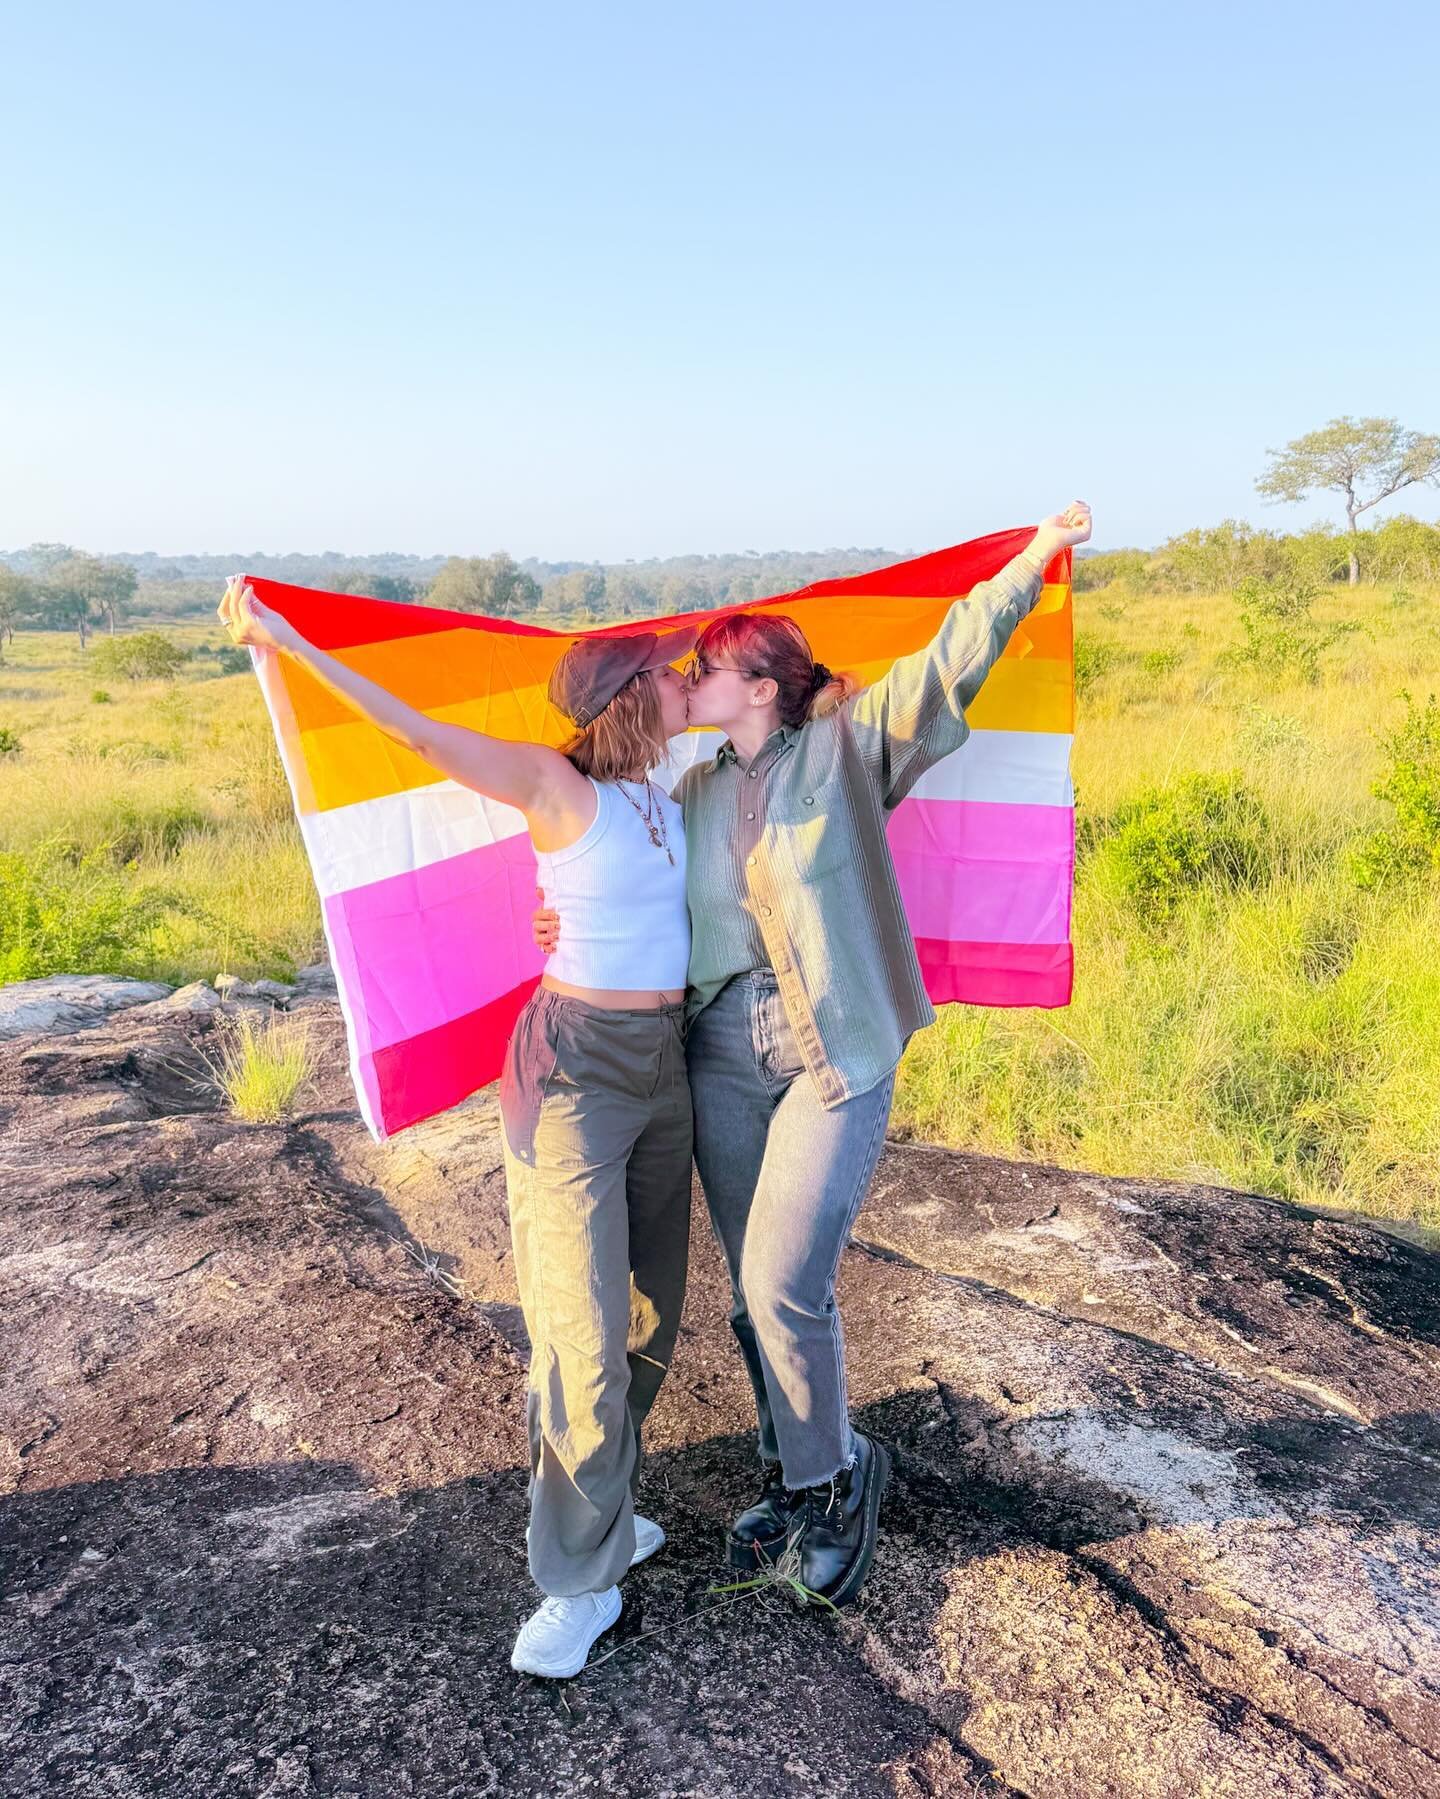 ONE BIG GAY SAFARI! 🌈🦏

Being on a safari with a queer owned travel company is such an  epic experience. @rhinoafrica and @silvan_safari have made us feel SO extremely welcomed, loved, and accepted here in the South African bush. We&rsquo;ve had fa